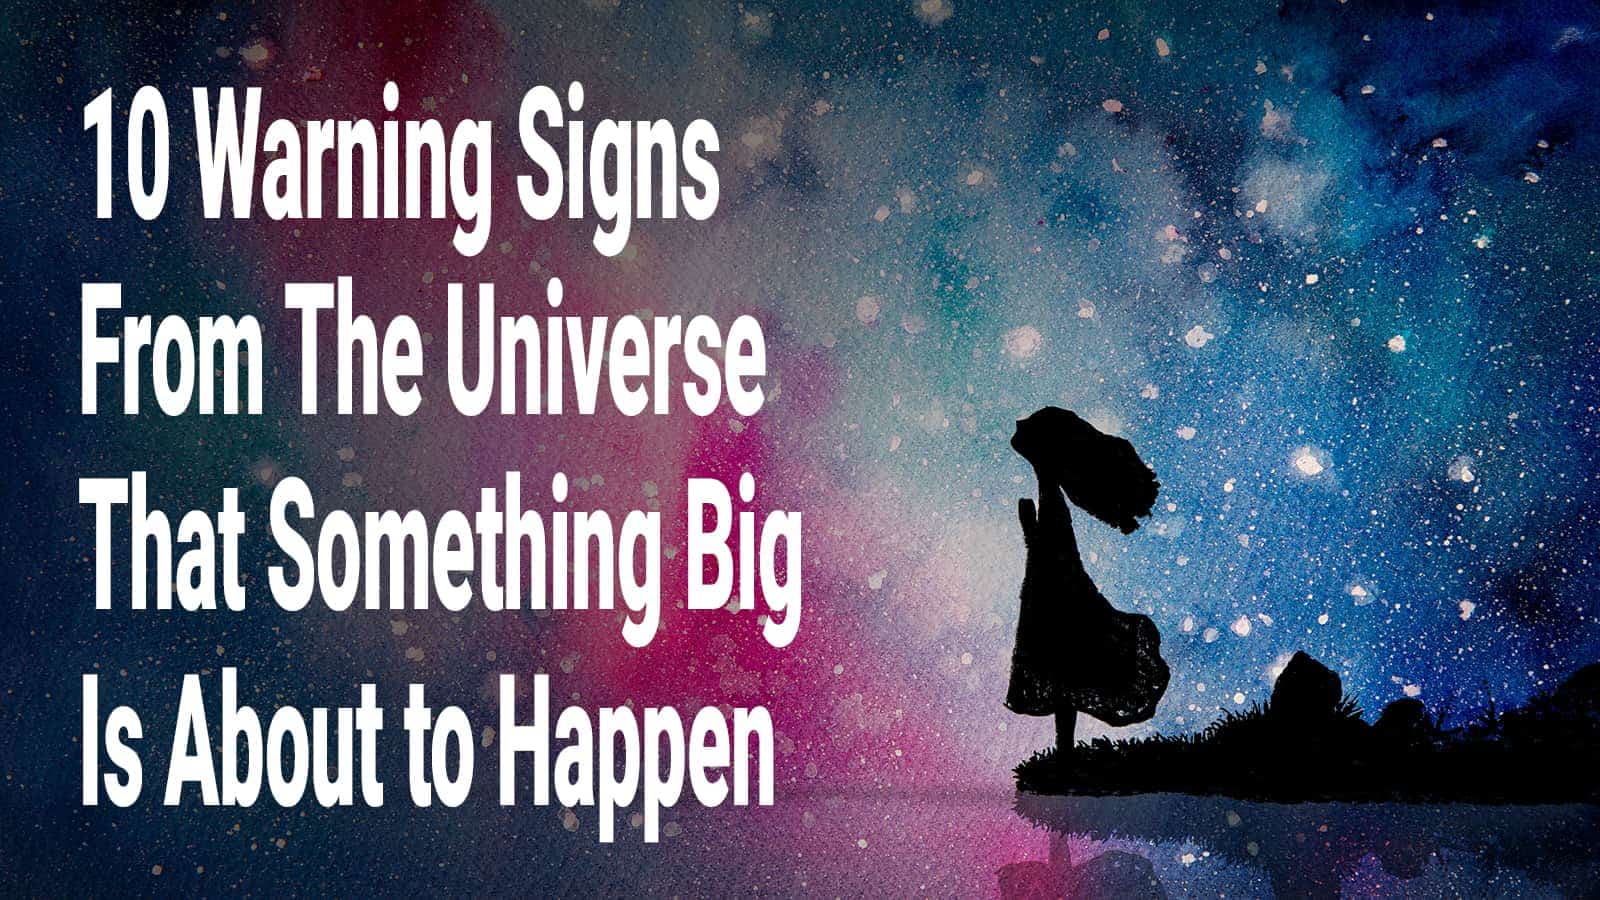 10 Warning Signs From The Universe That Something Big Is About to Happen